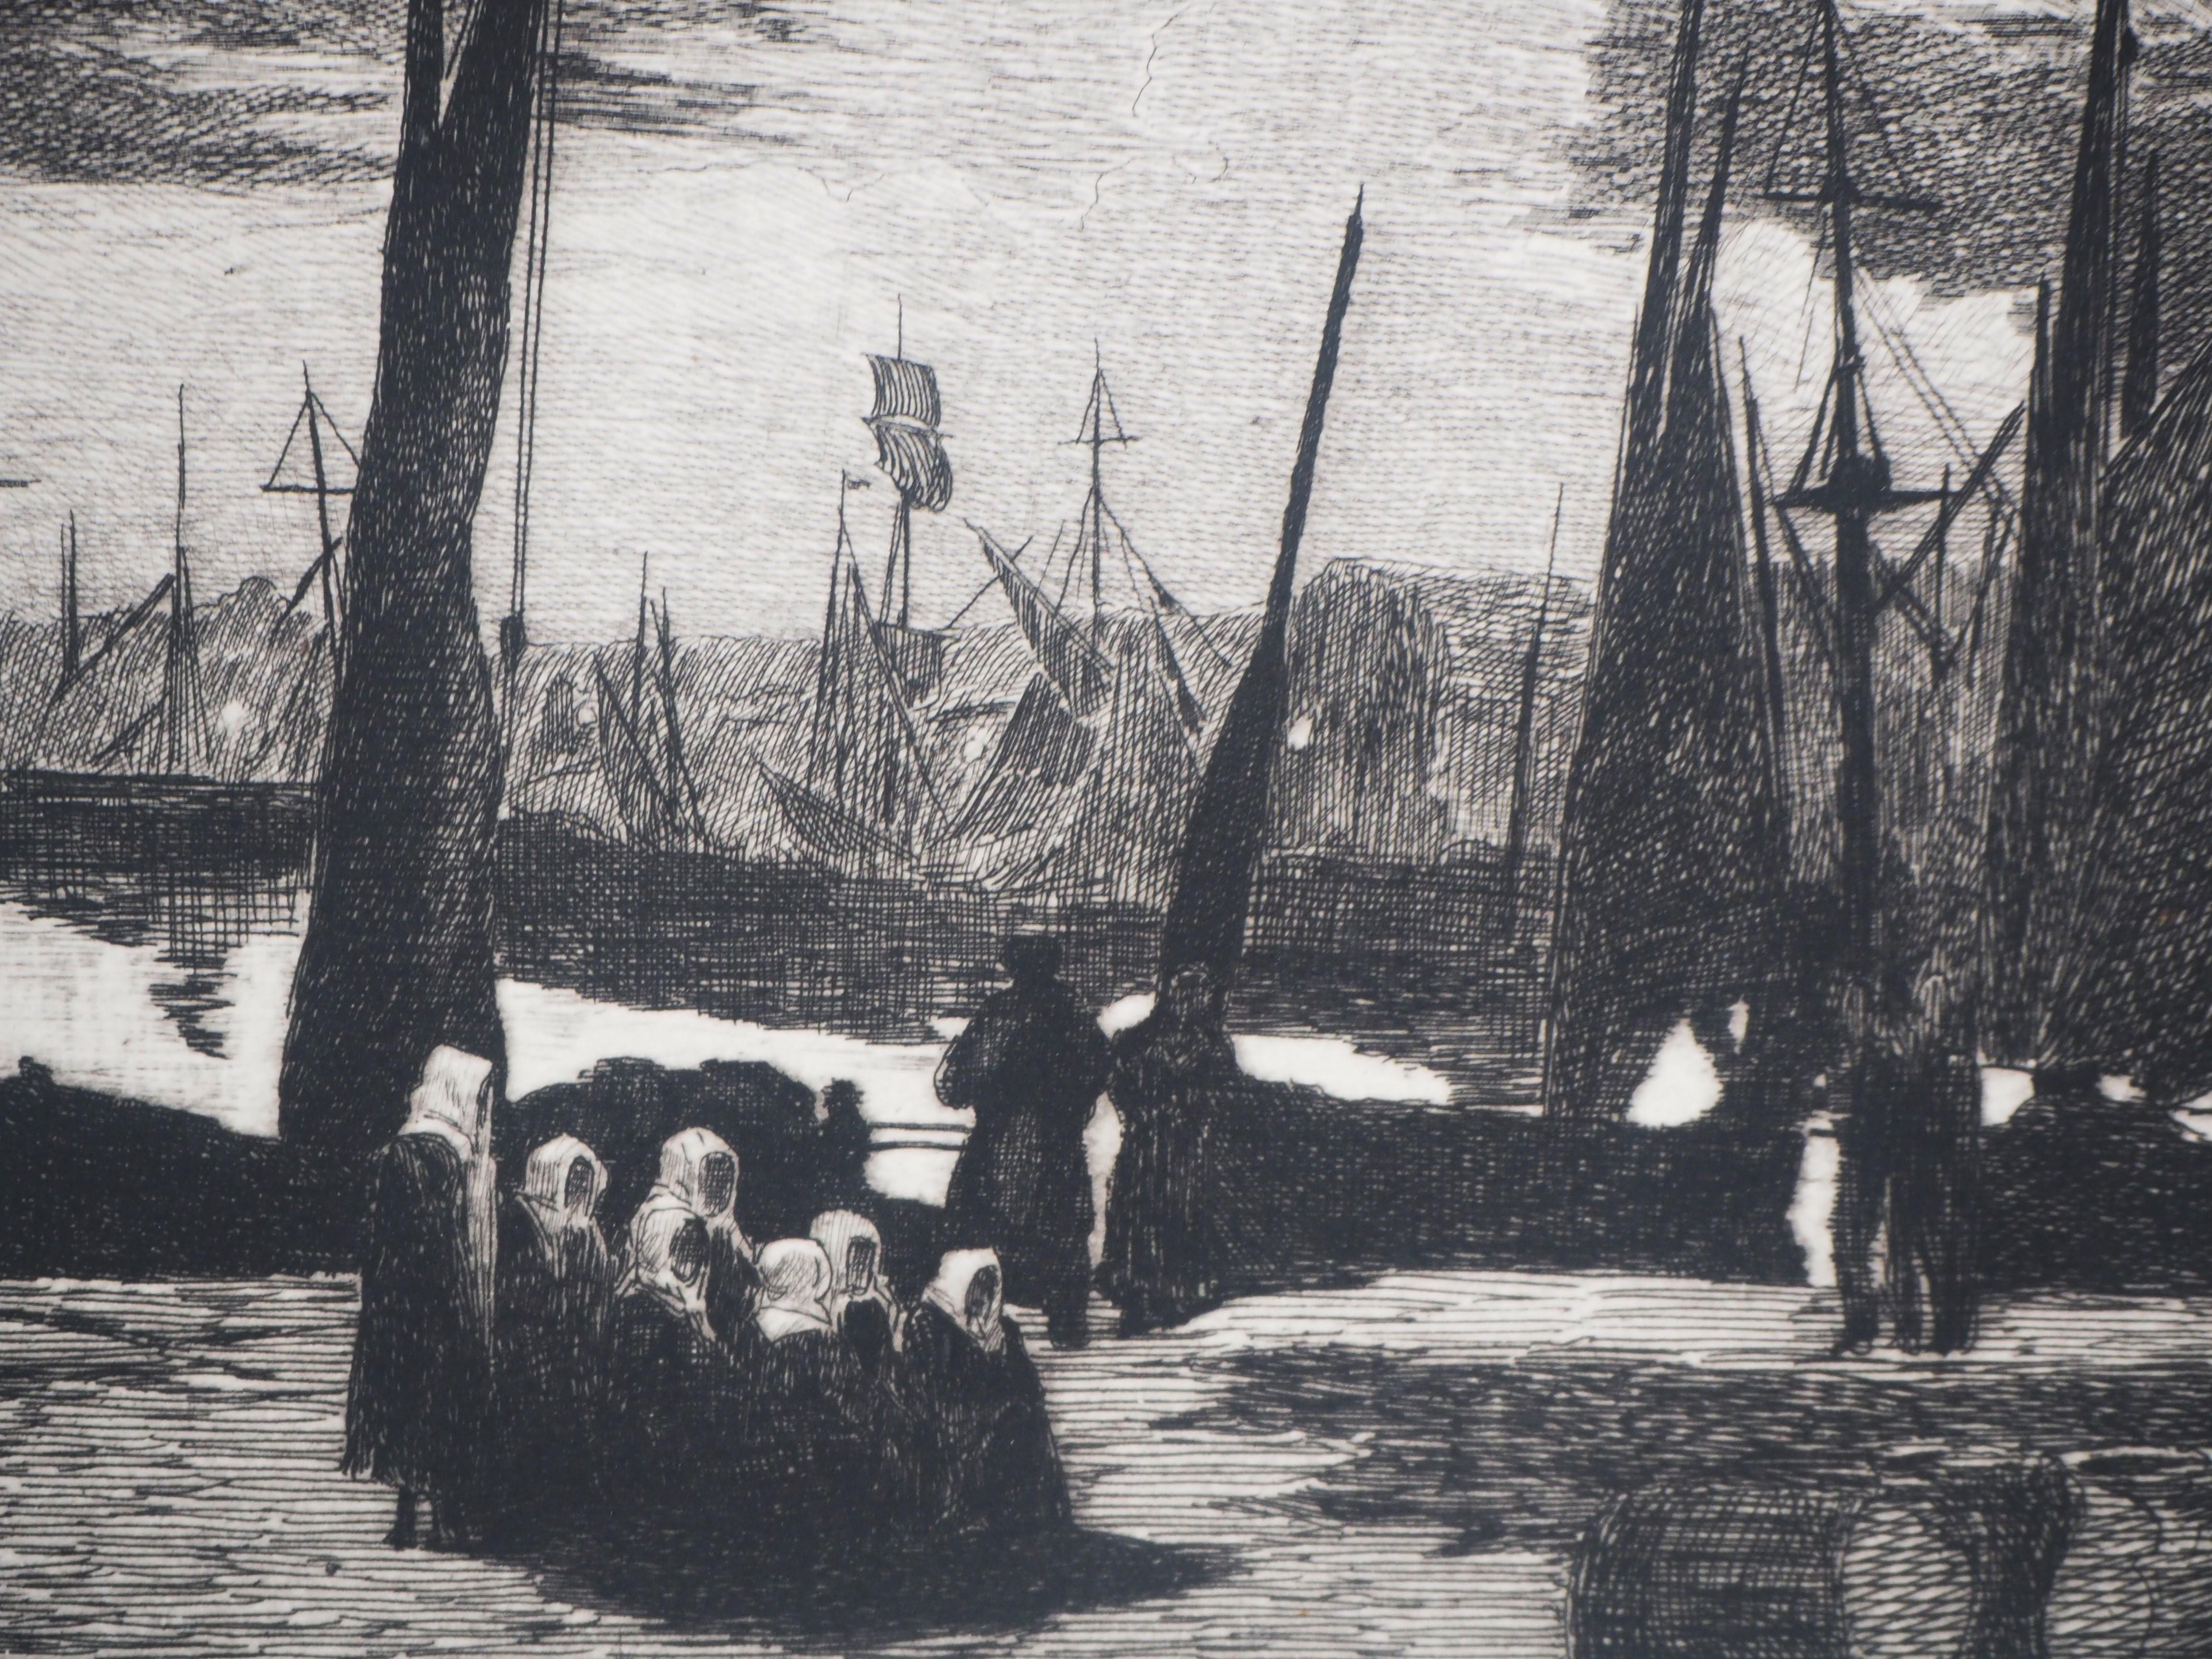 The Harbour, Sailboats - Original etching - Ed. Durand Ruel, 1873 - Impressionist Print by Edouard Manet